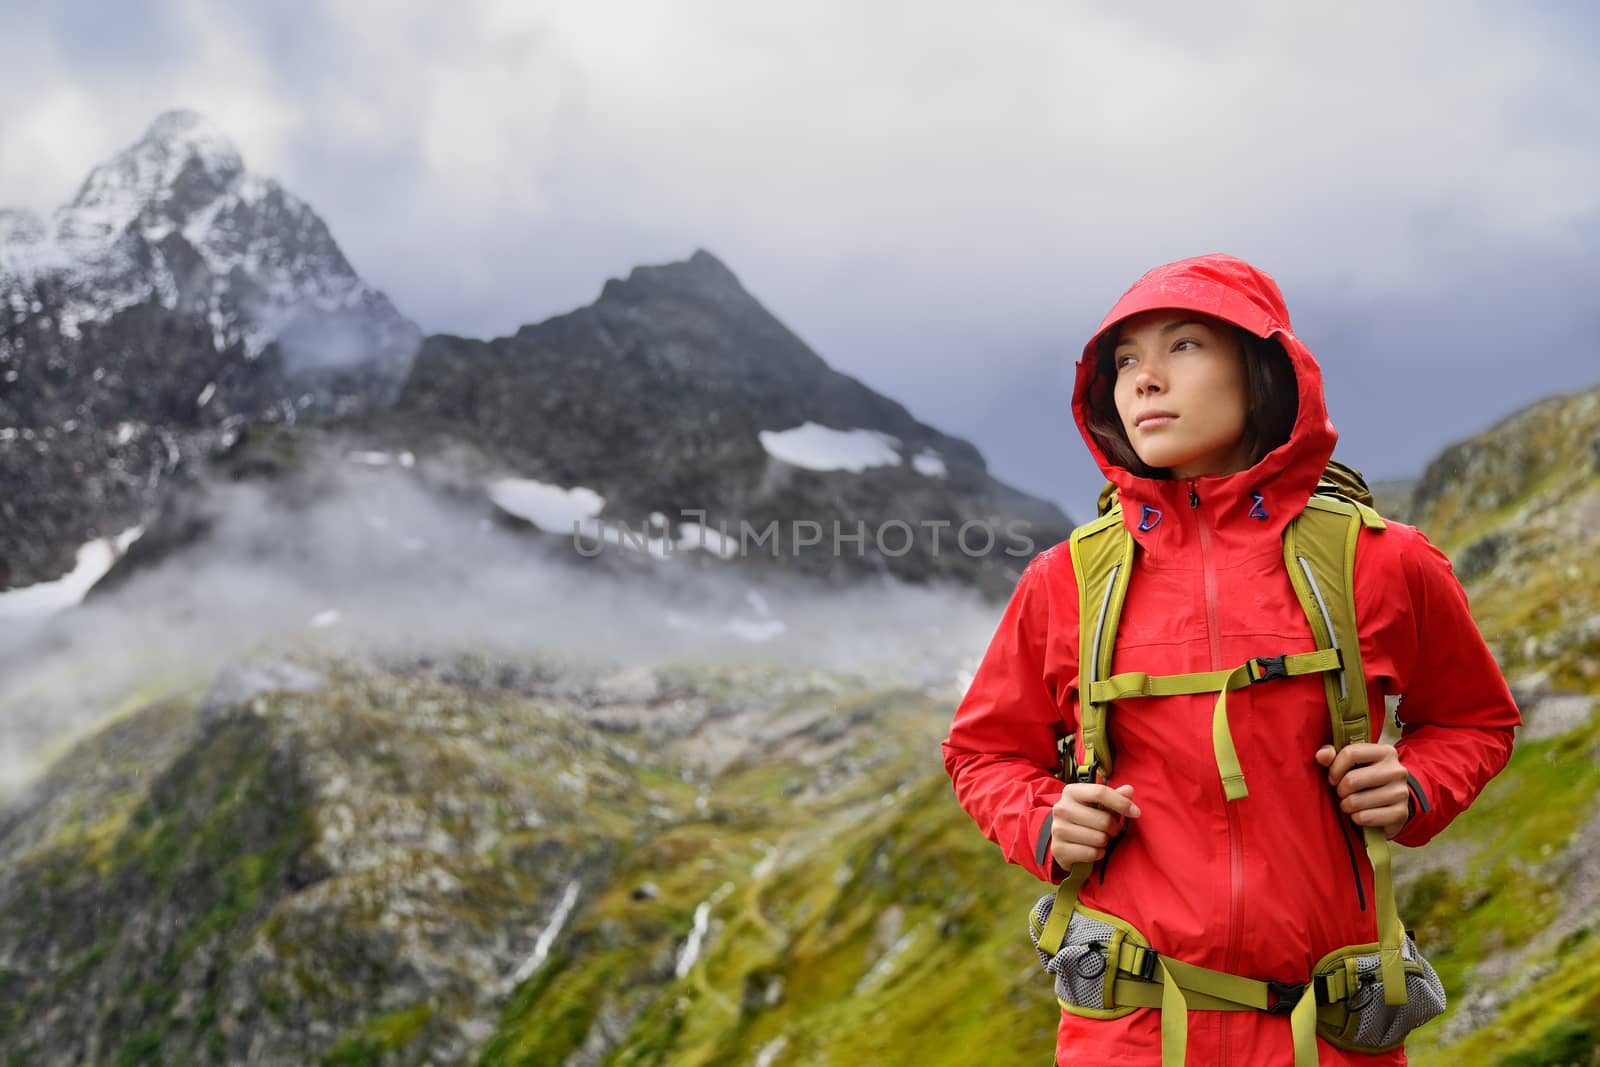 Alps Hiking - Asian hiker woman in Switzerland on trek in mountains with backpack living a healthy active lifestyle. Hiker girl on nature landscape hike in Urner Alps, Berne, Swiss alps, Switzerland.